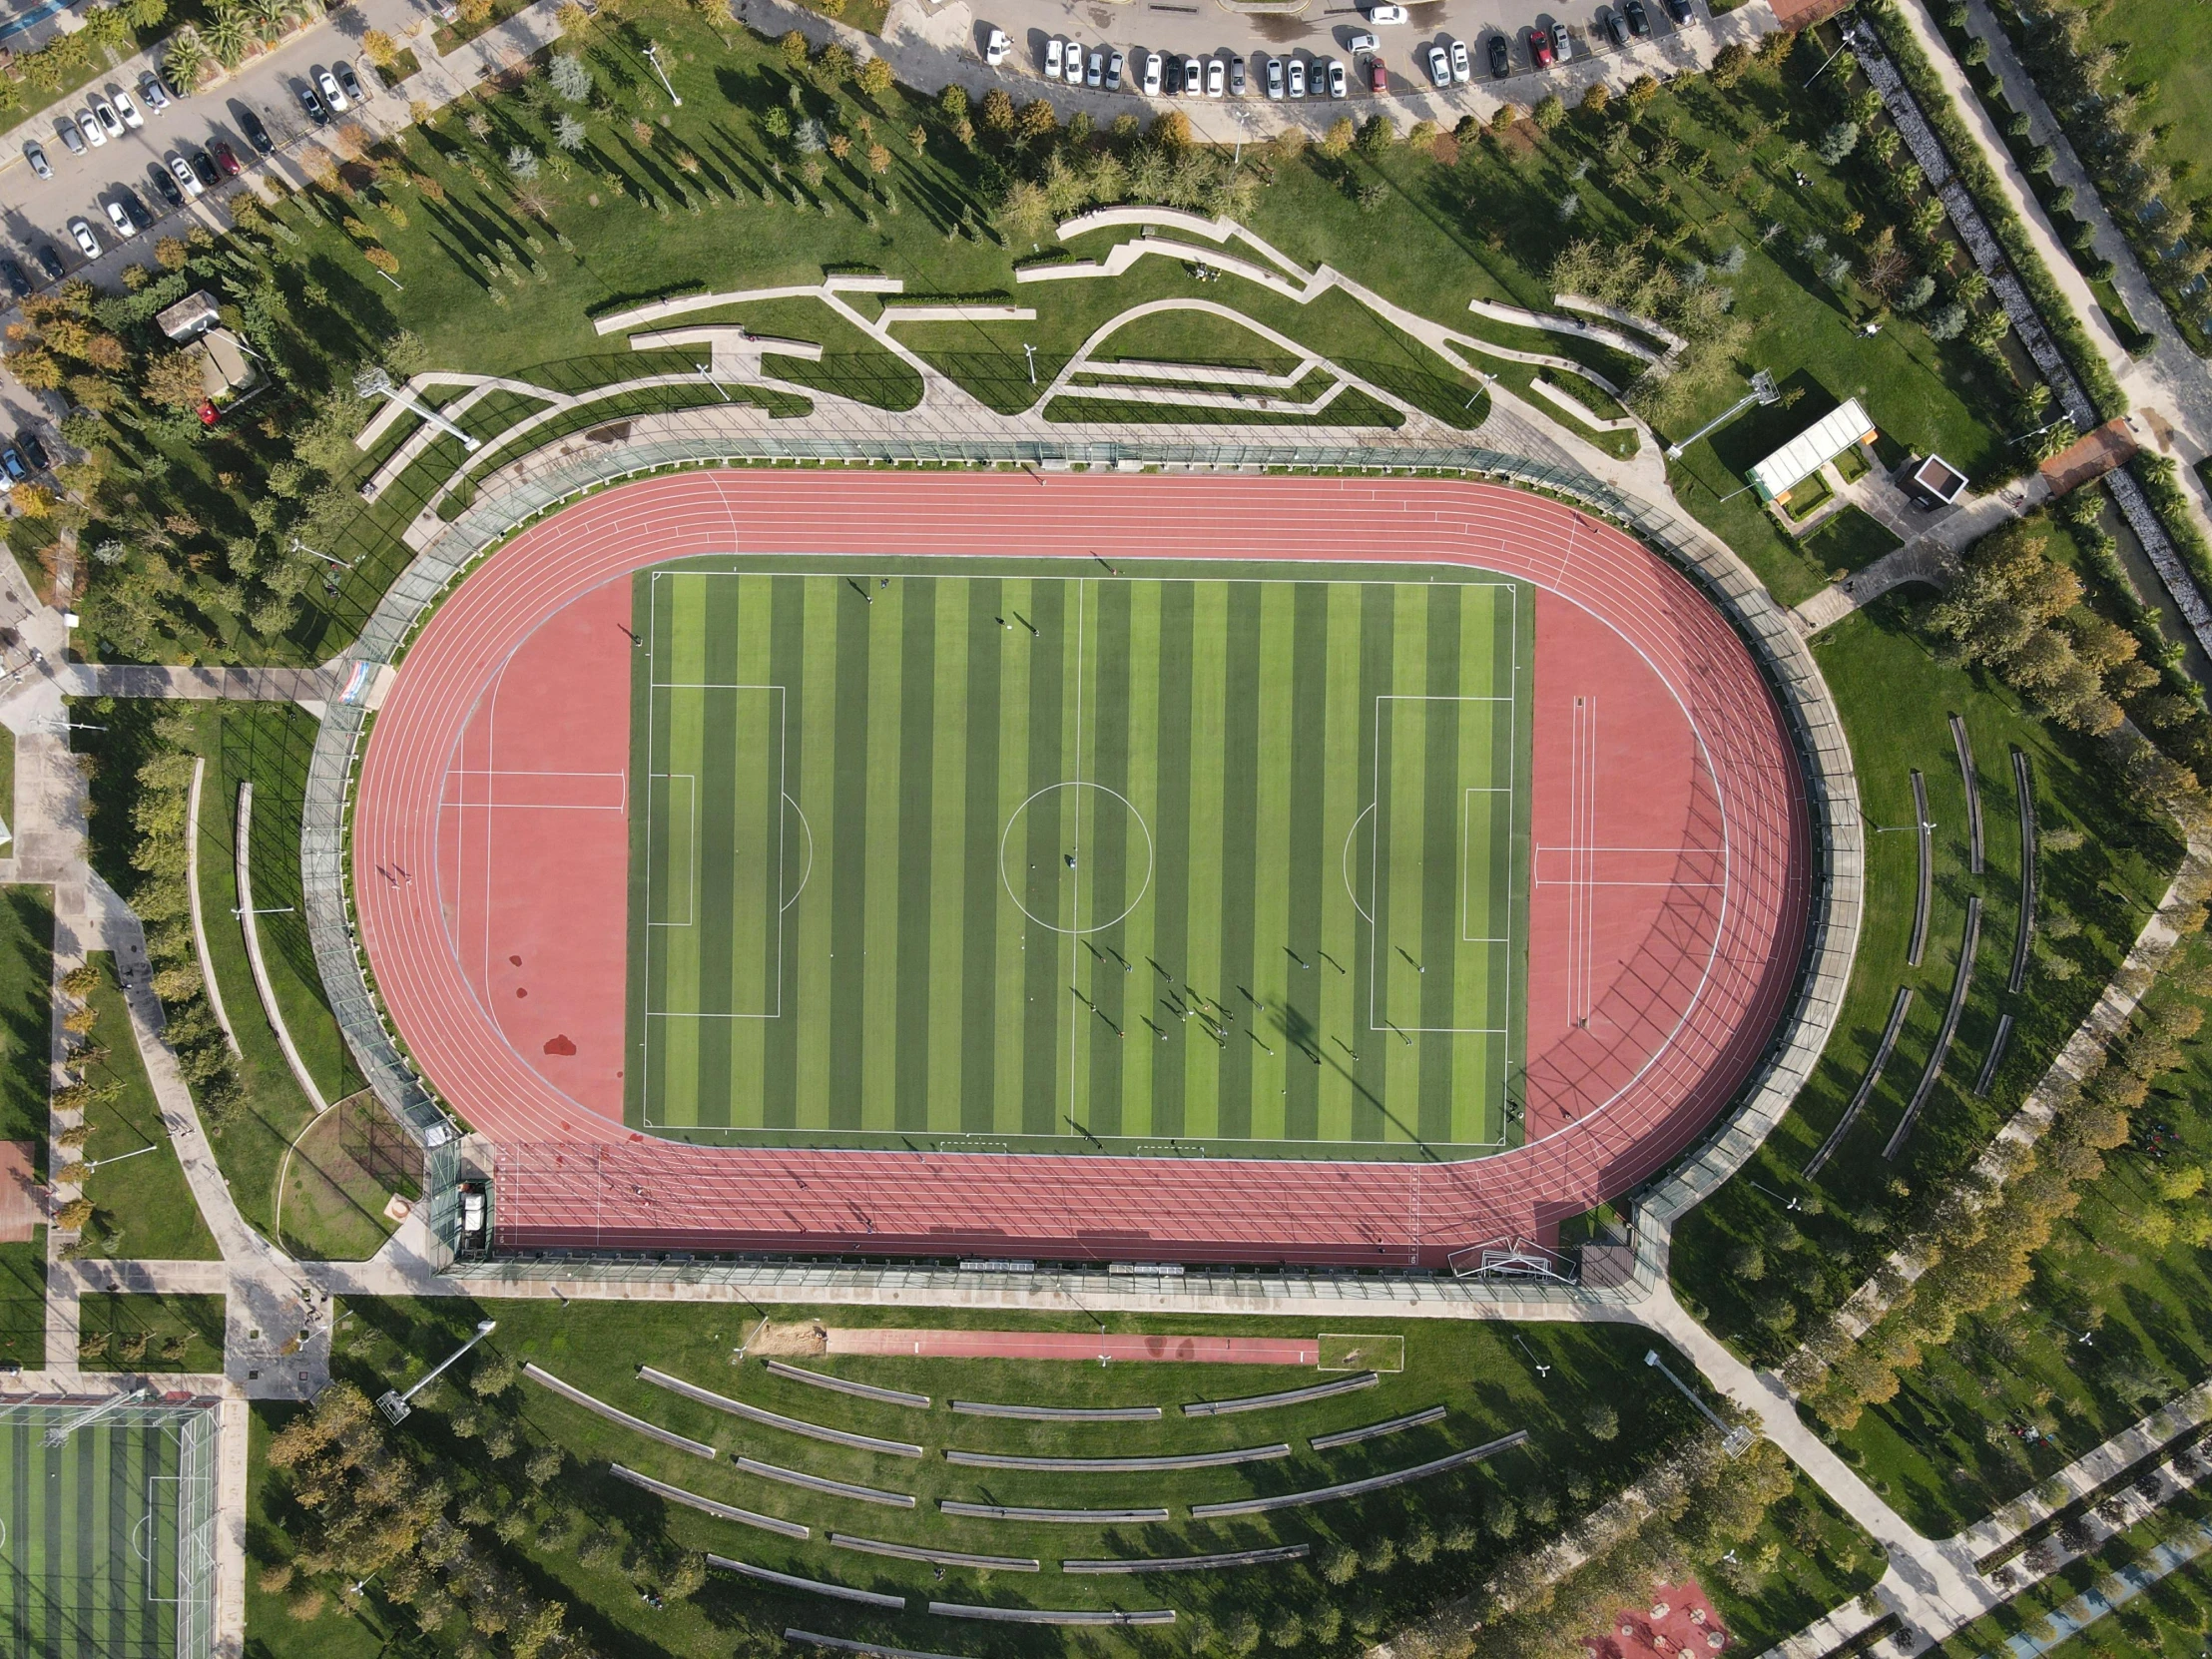 an aerial view of the stadium from above